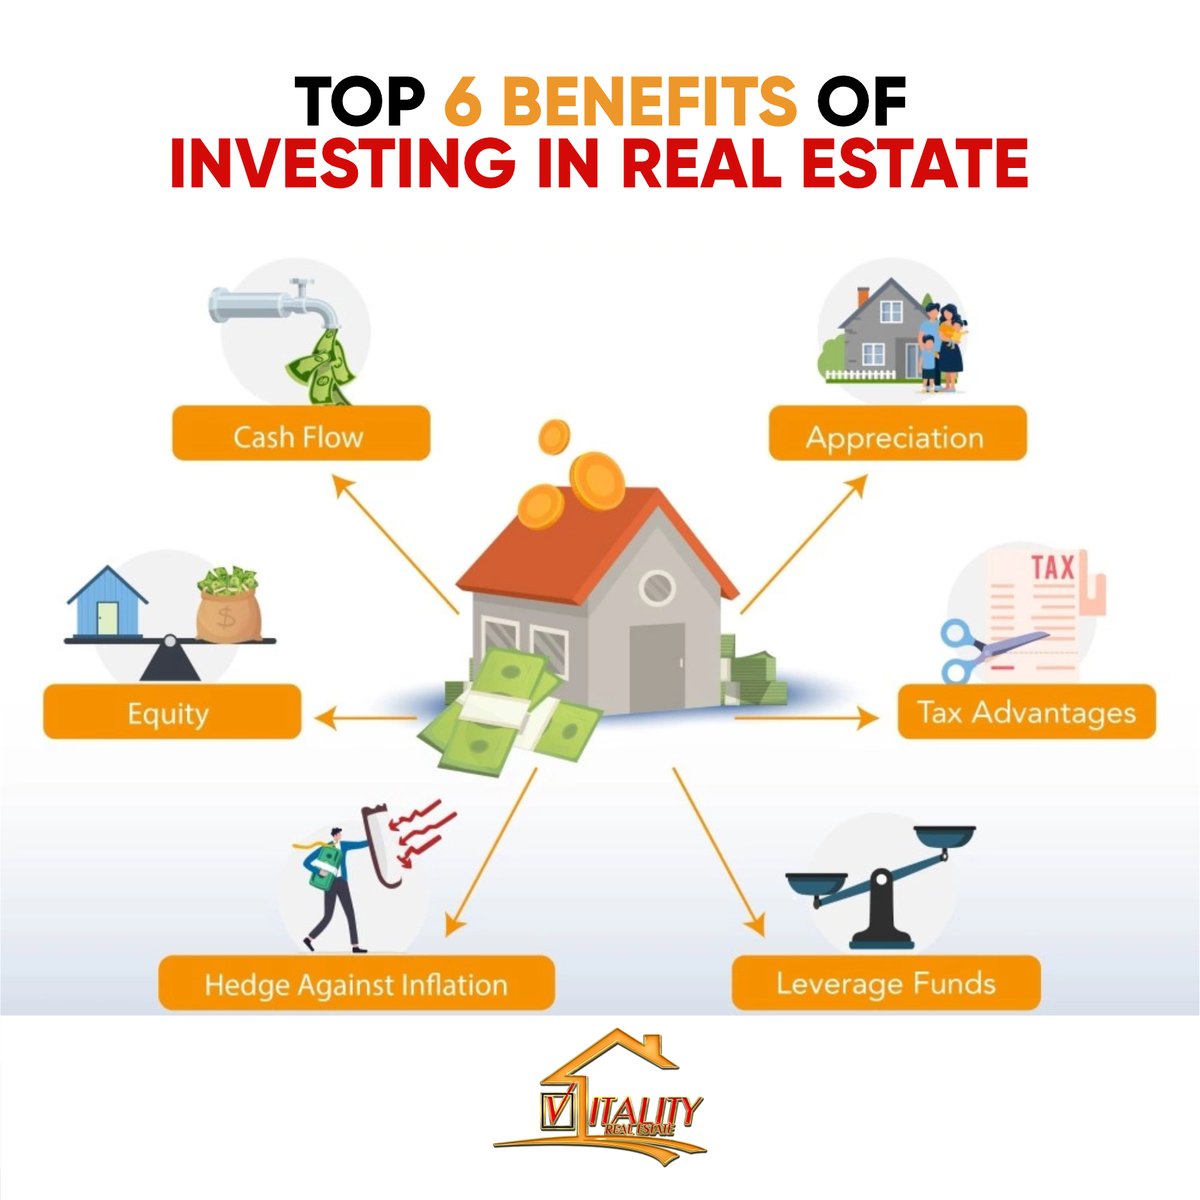 Investing in real estate offers the advantage of a continually appreciating asset, coupled with monthly cash flow.

#realestateinvesting #wealthbuilding #passiveincome #financialfreedom #securefuture #assetappreciation #monthlycashflow #investmentopportunity #propertyportfolio